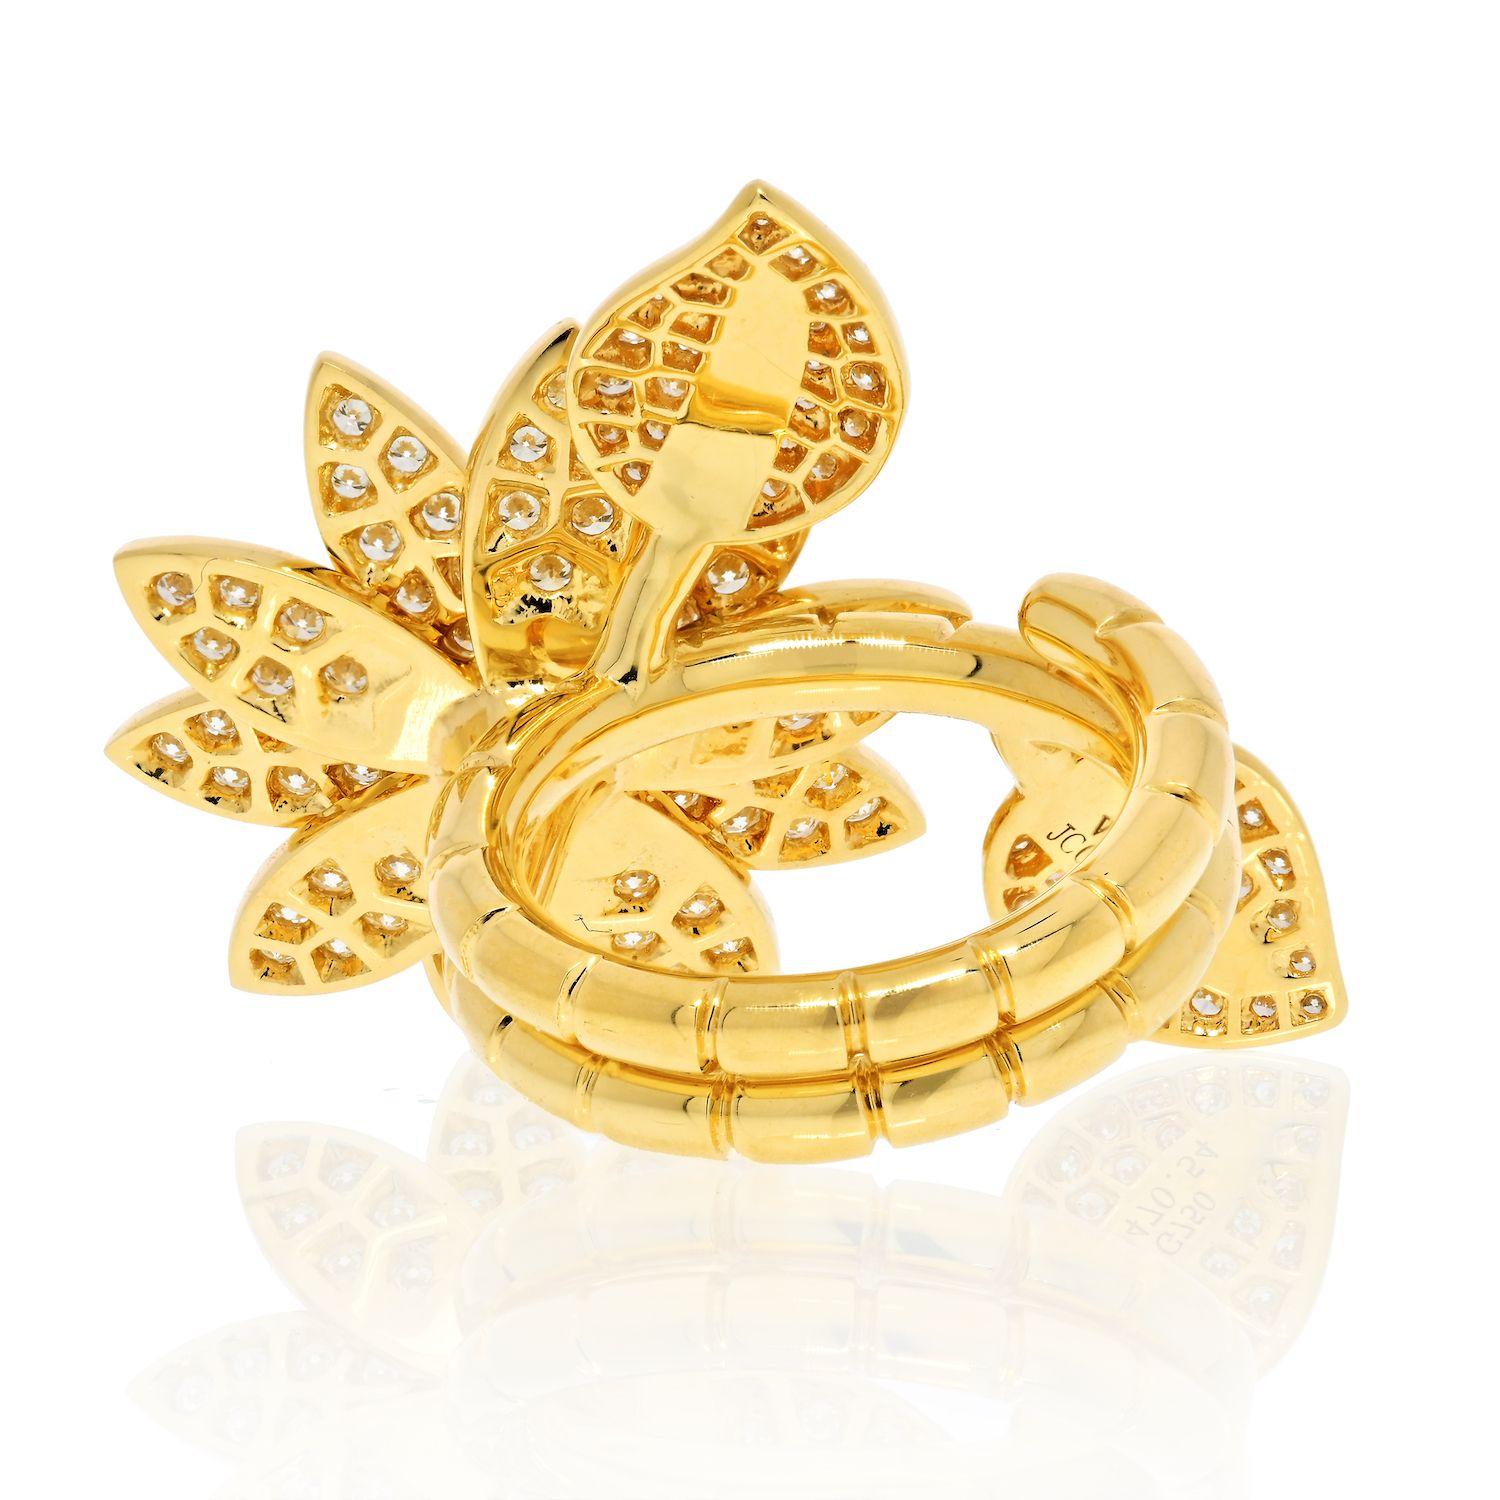 Authentic Van Cleef & Arpels The Lotus Between the Finger Ring, size 7, EU 54, ring has been polished and cleaned, comes with VCA ring box.
The Lotus ring set in yellow gold and diamonds is one of the Maison's emblematic pieces. This exceptional